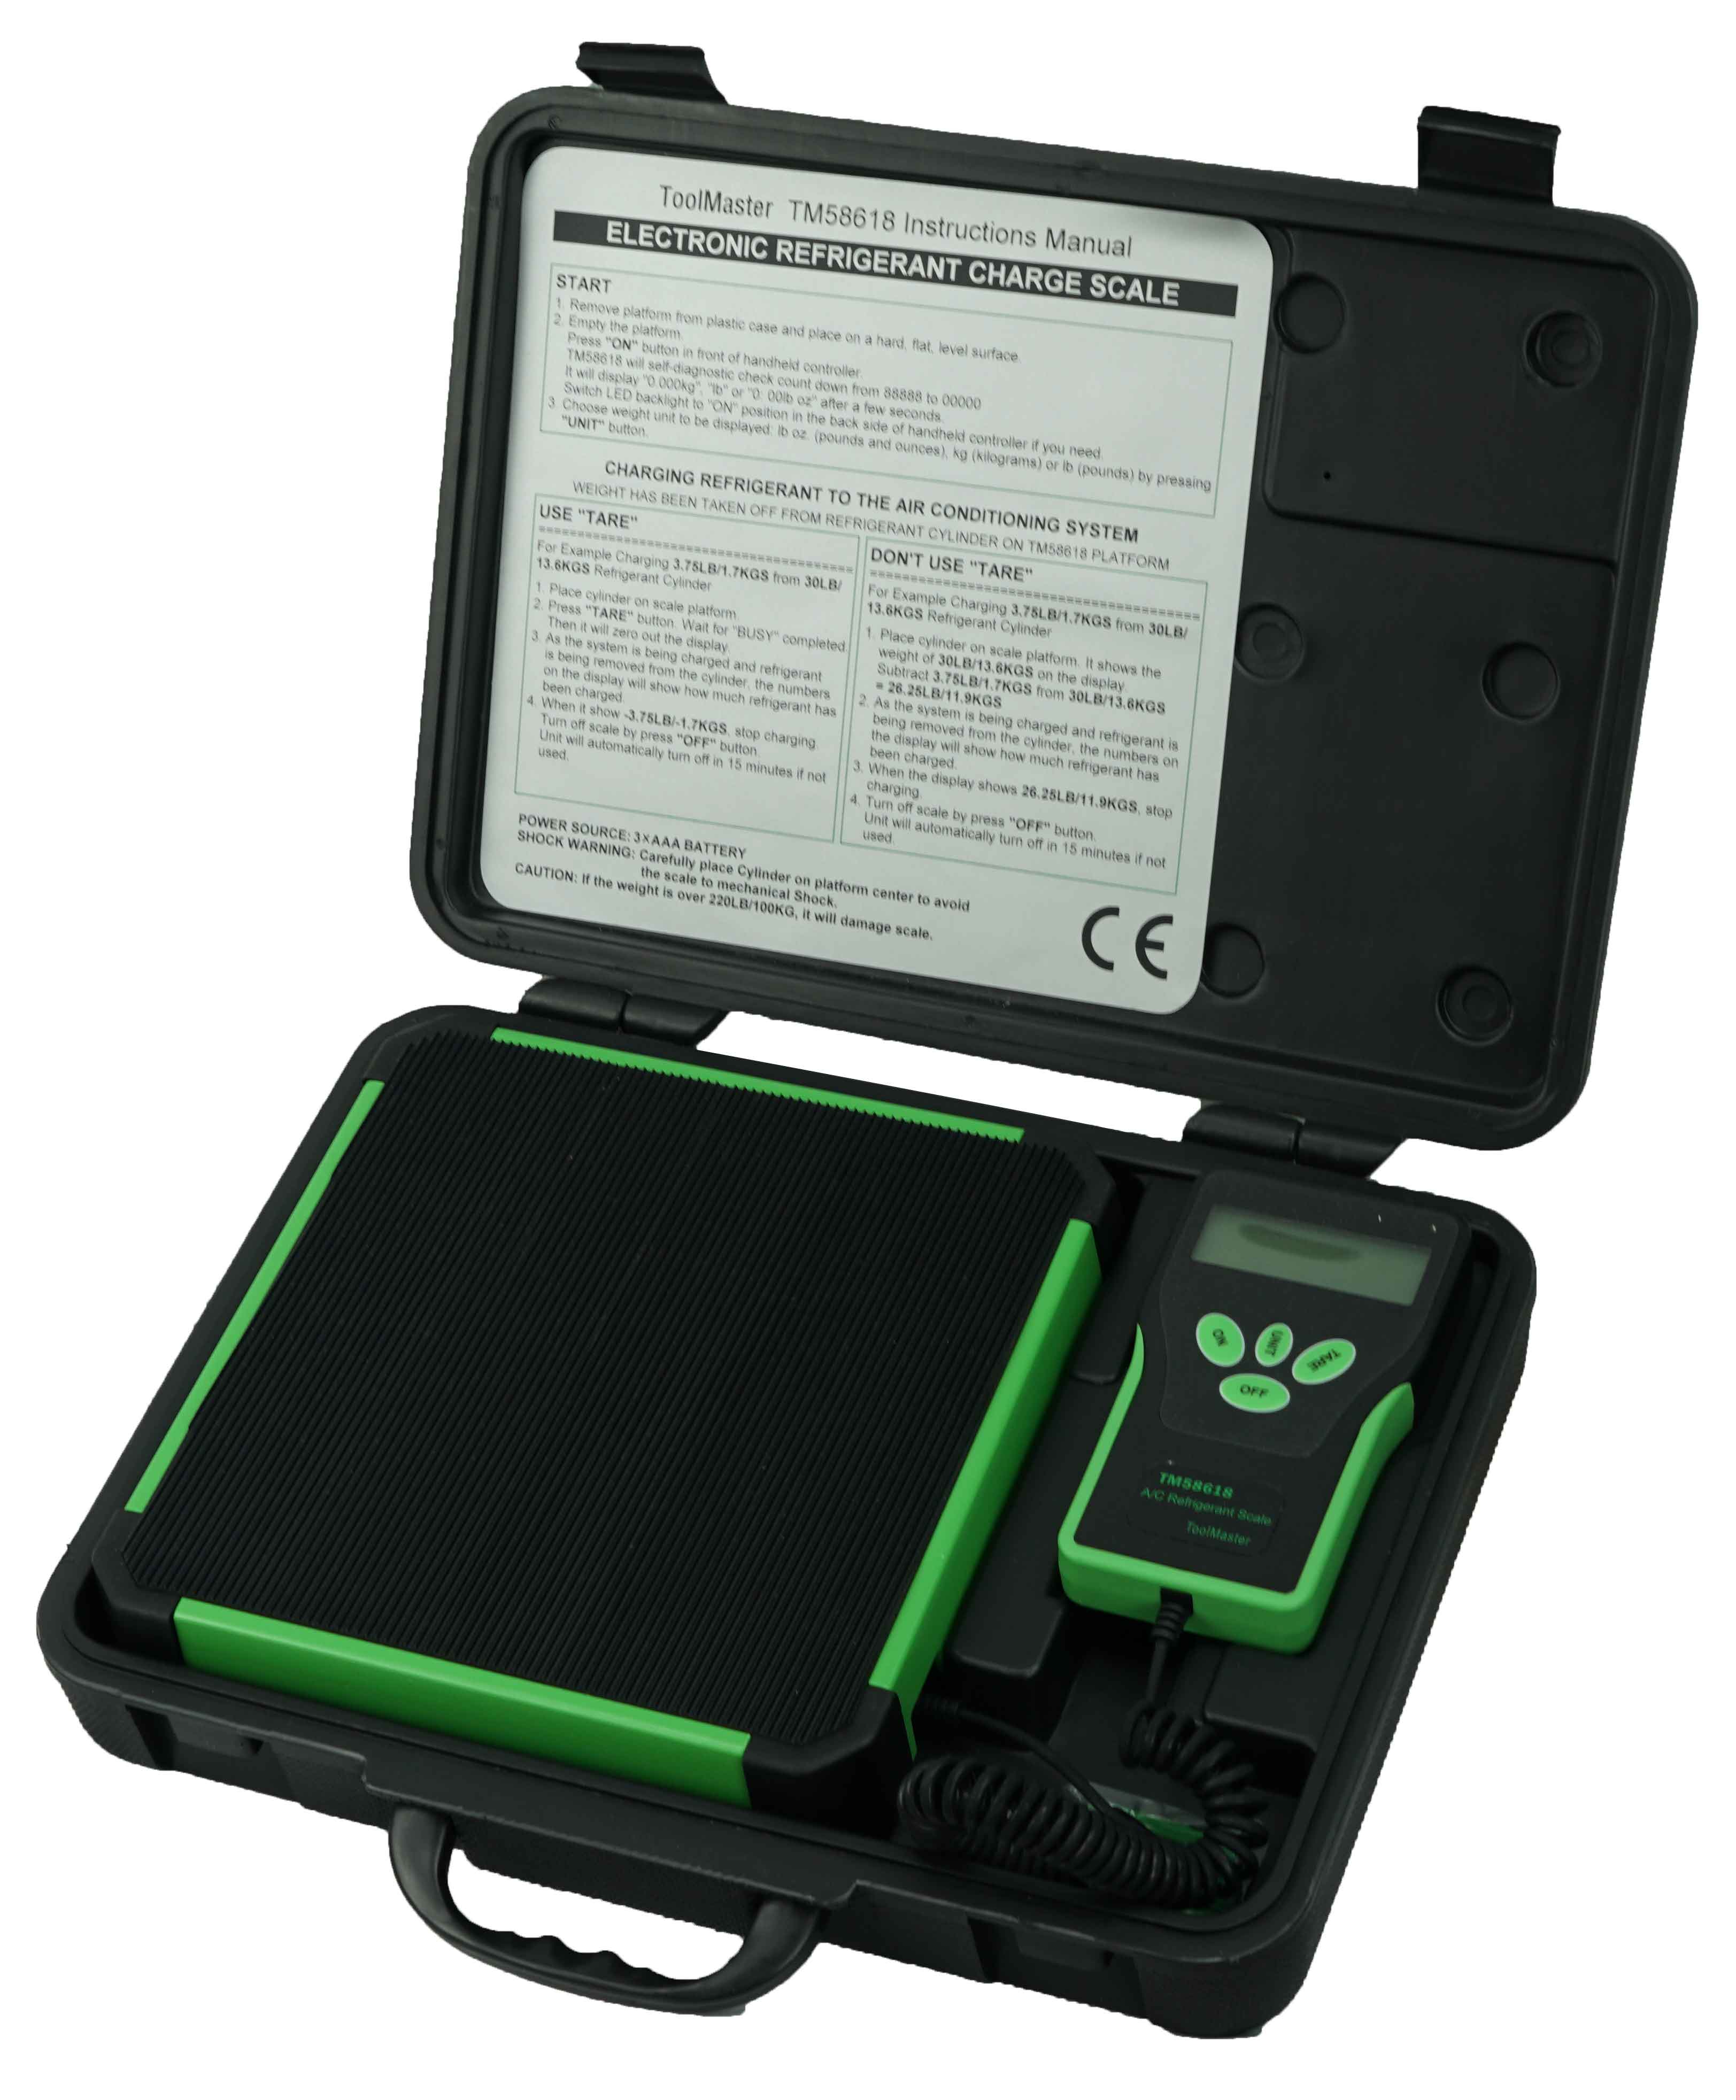 TM58618 - ToolMaster-Digital-Refrigerant-Scale-100-KGS-5G-ELECTRONIC-REFRIGERANT-CHARGE-SCALE-with-CE-CERTIFICATION